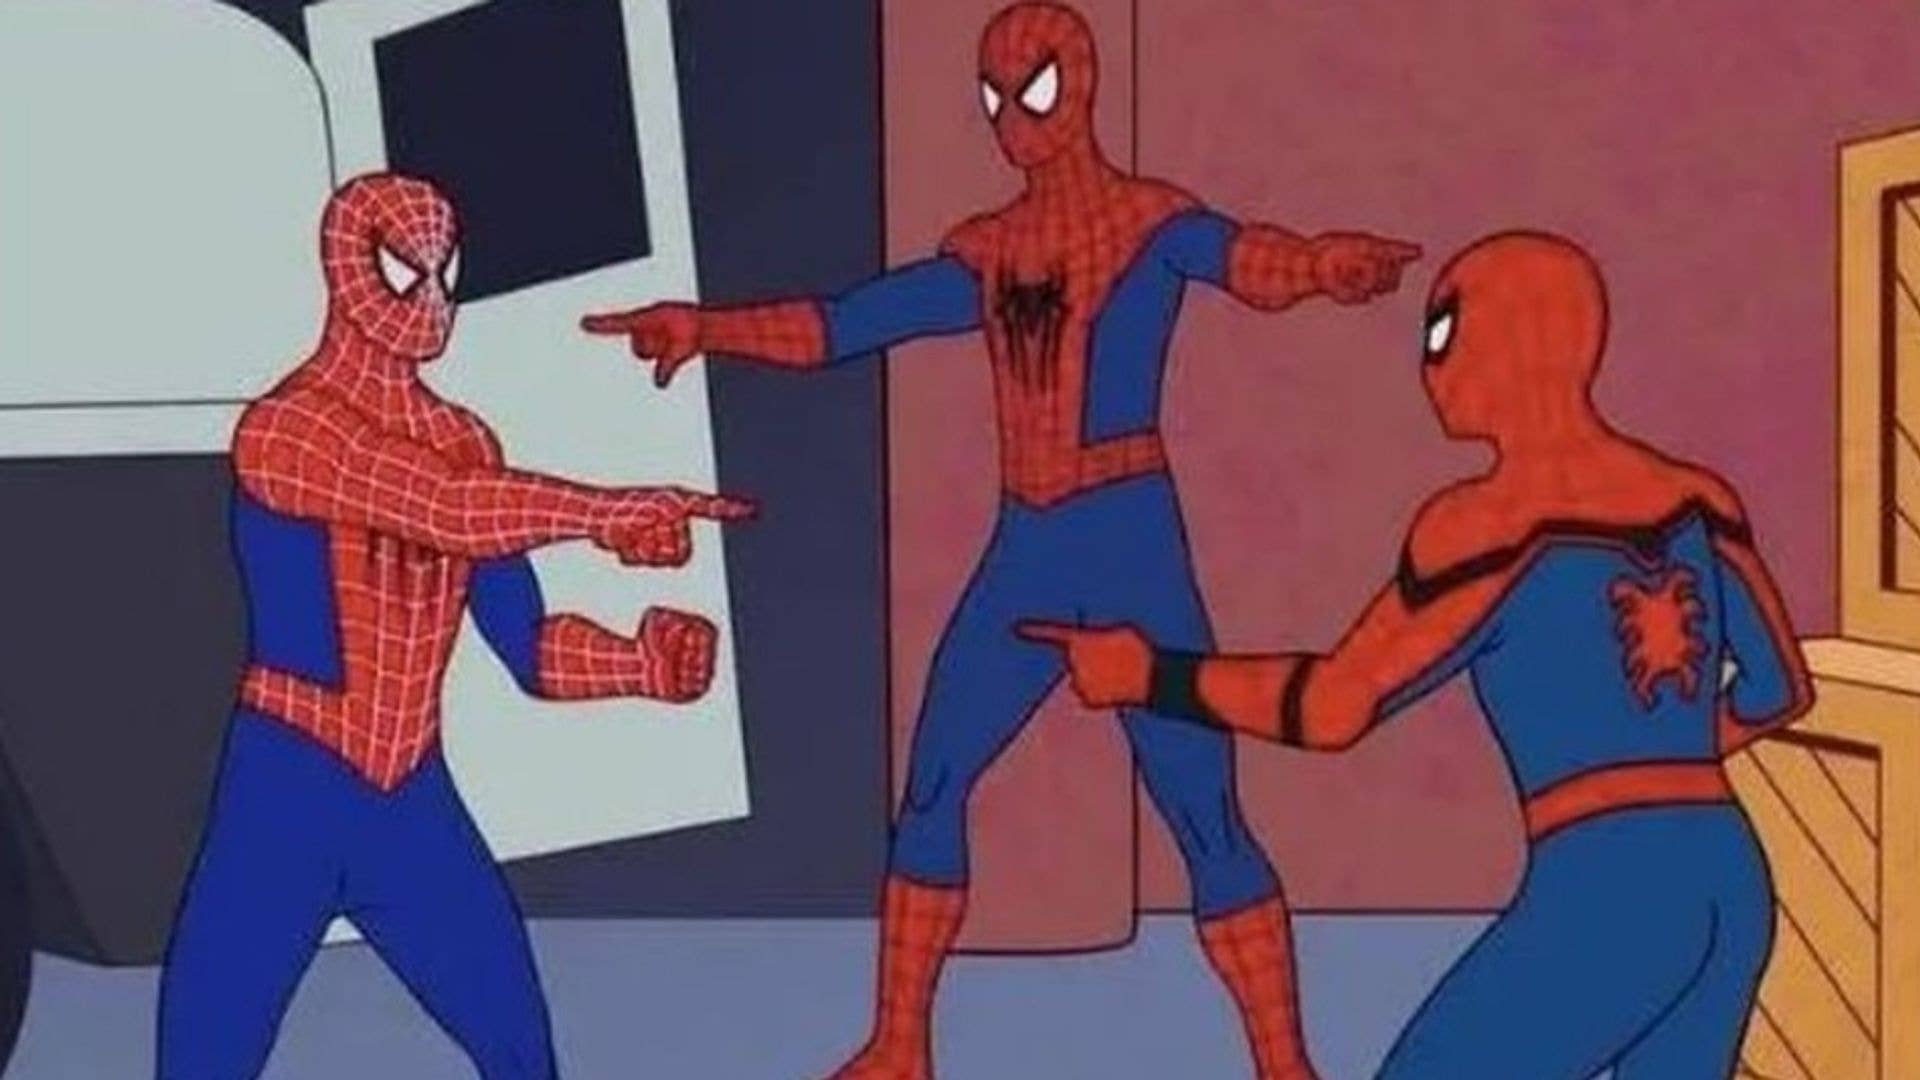 3 identical spidermen pointing at each other - recruitment